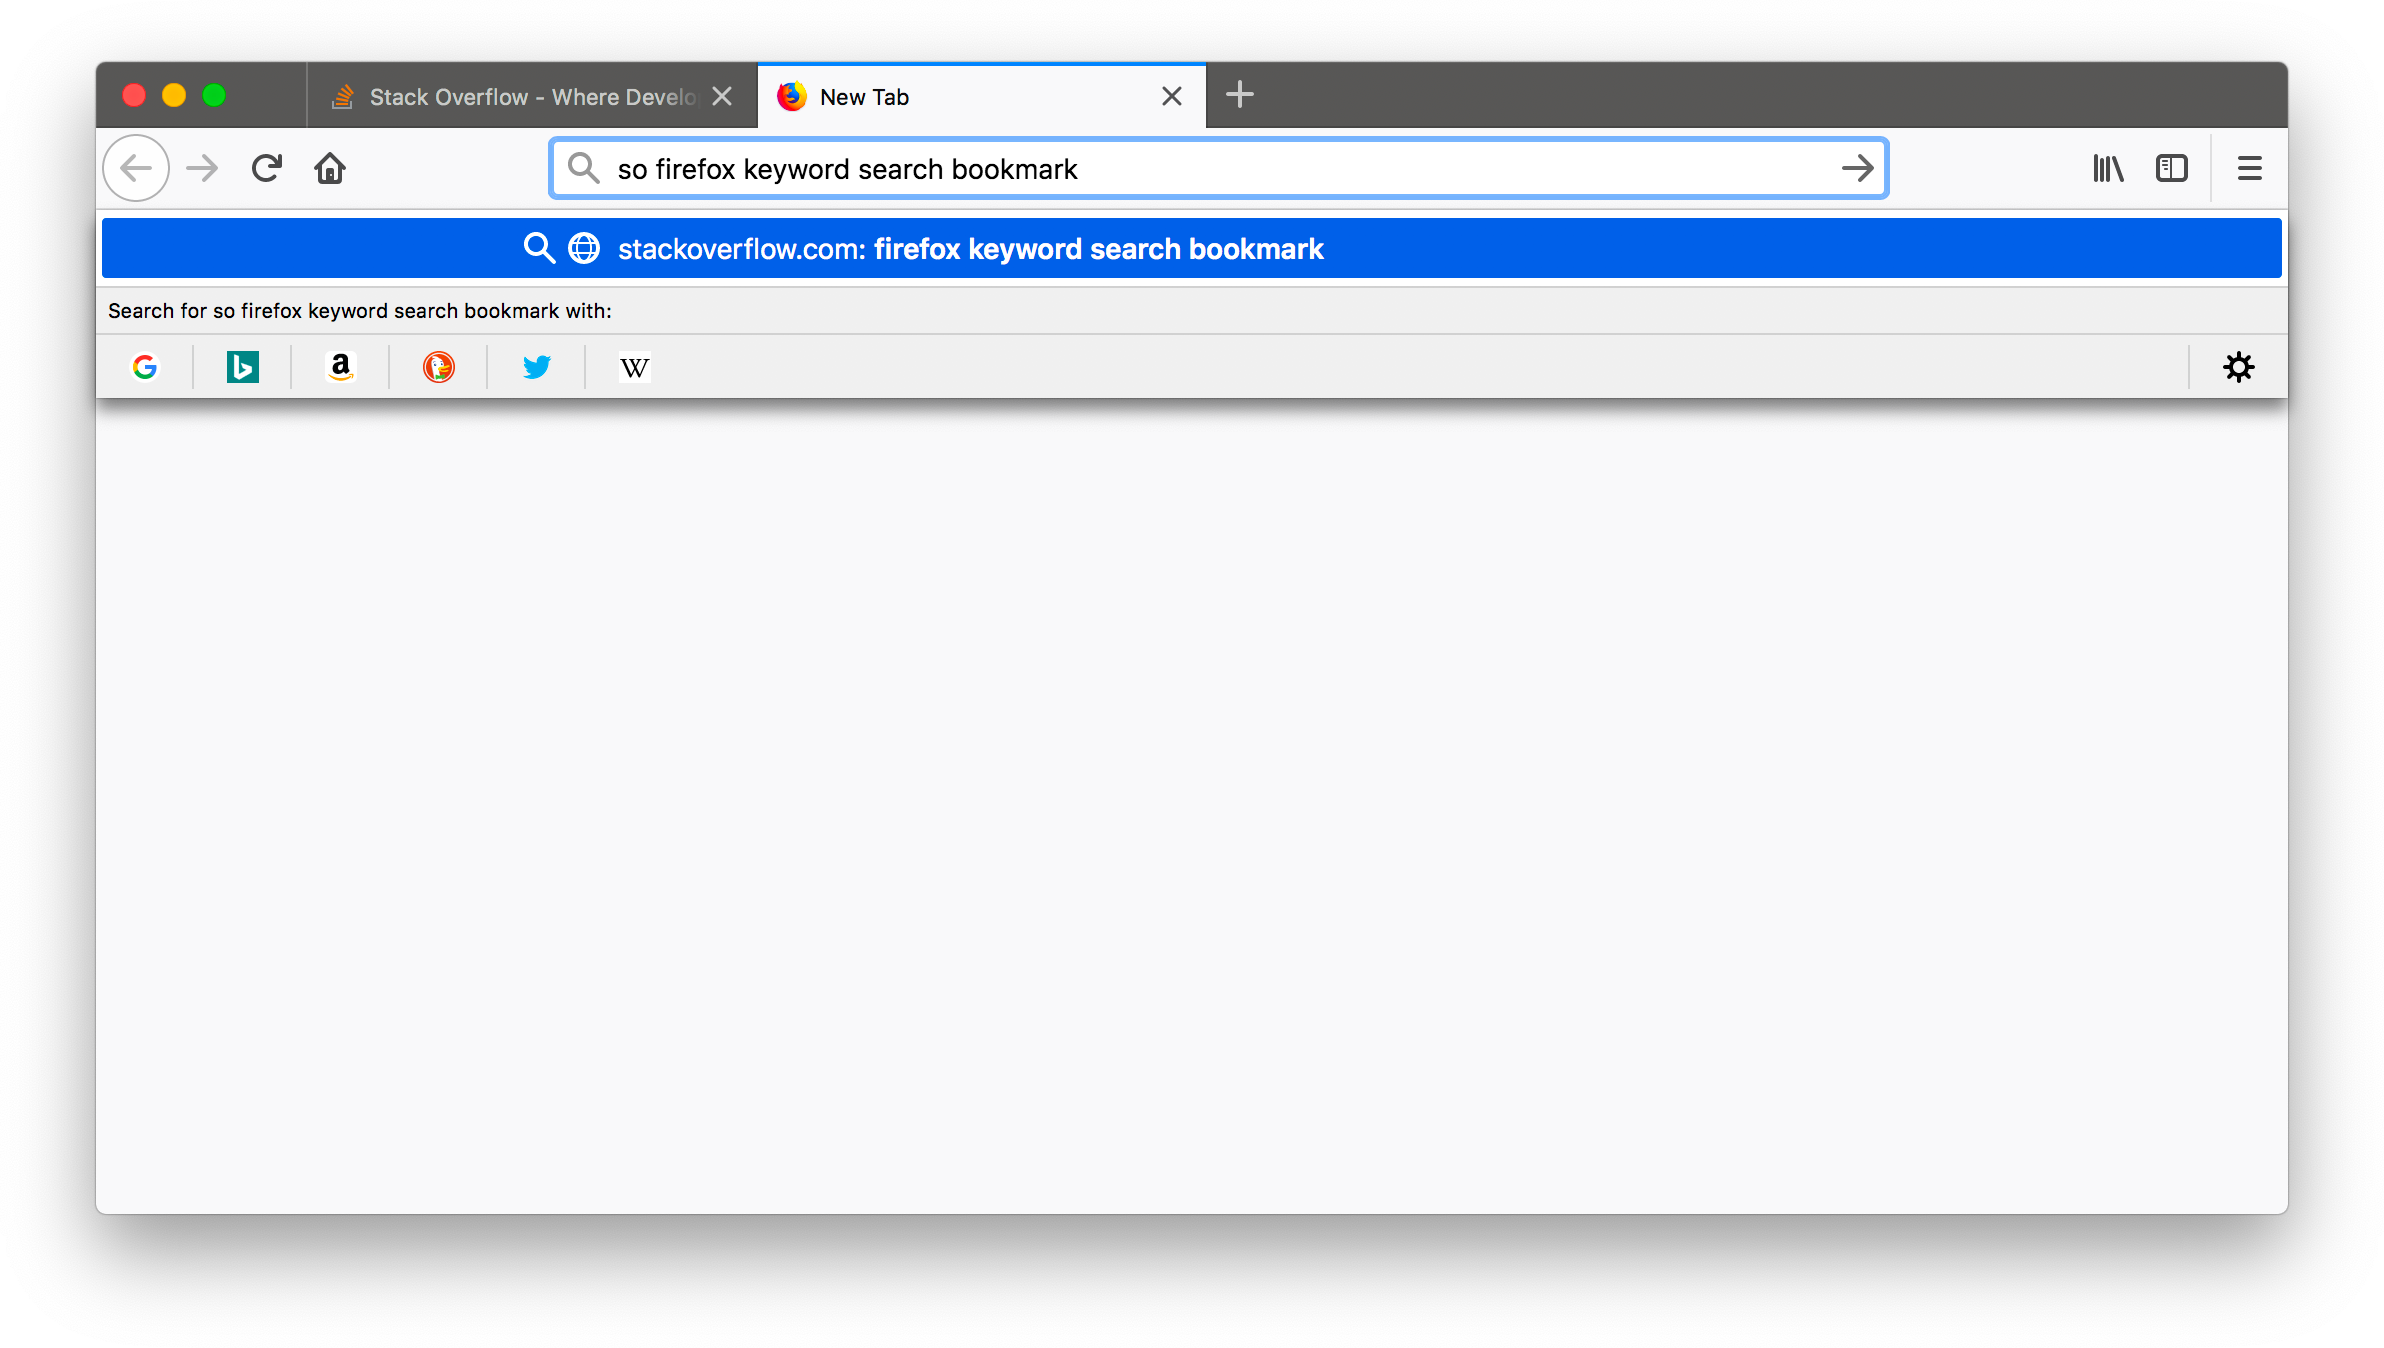 Screenshot of typing so firefox keyword search bookmark into the address bar.